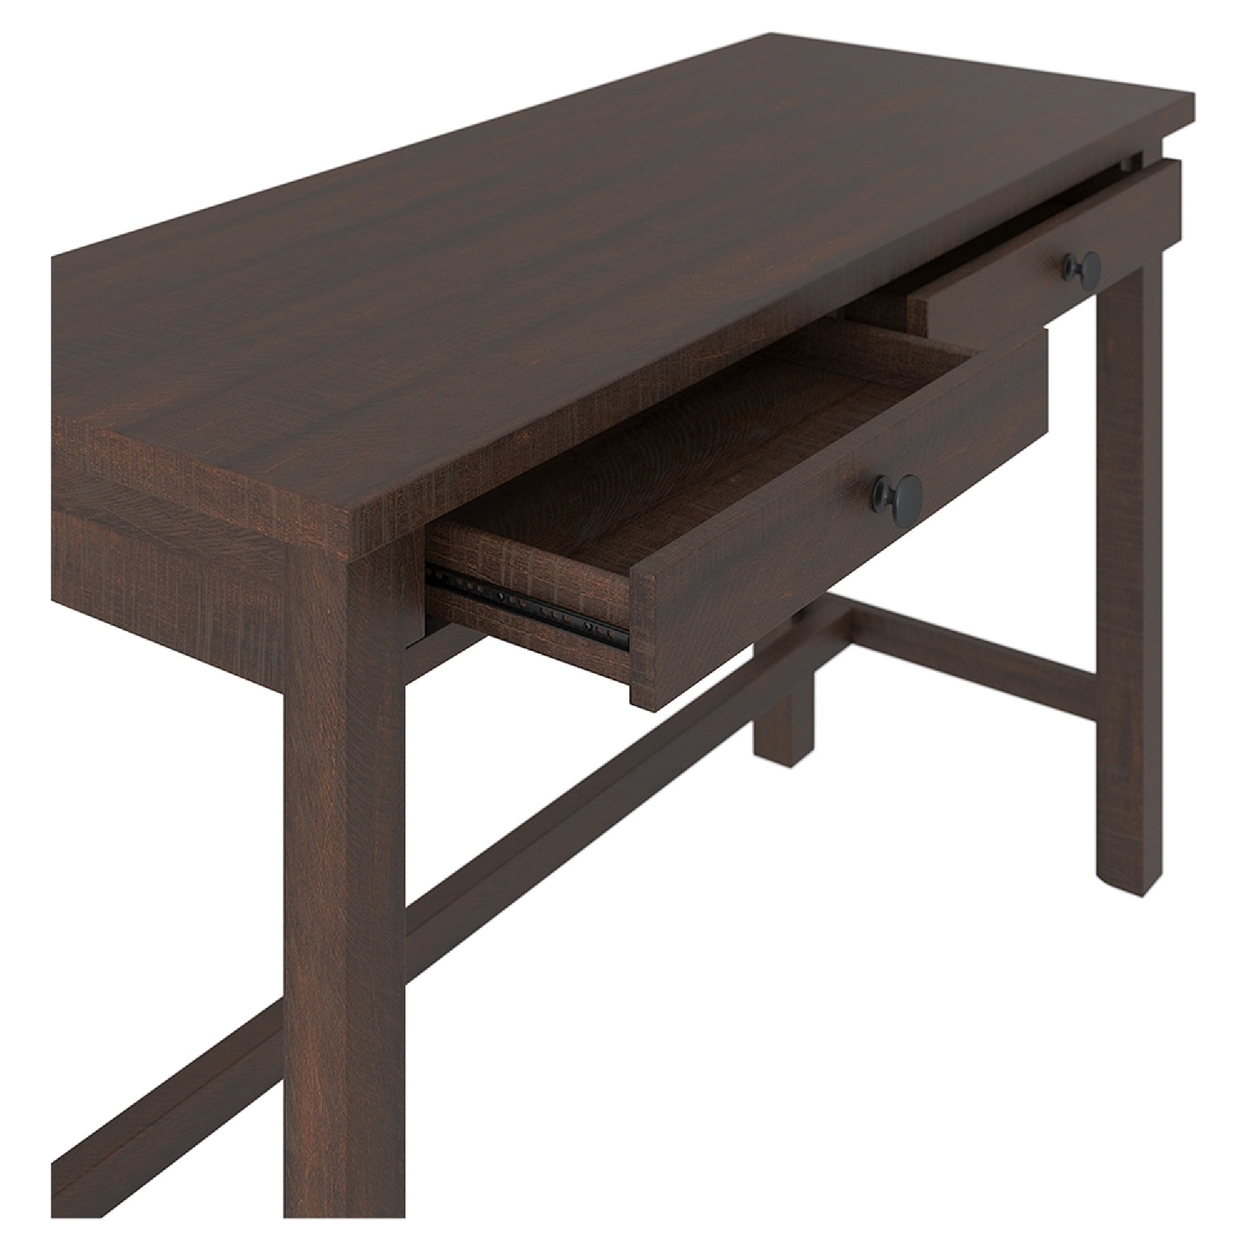 Wooden Writing Desk With Block Legs And 2 Drawers, Dark Brown And Black- Saltoro Sherpi